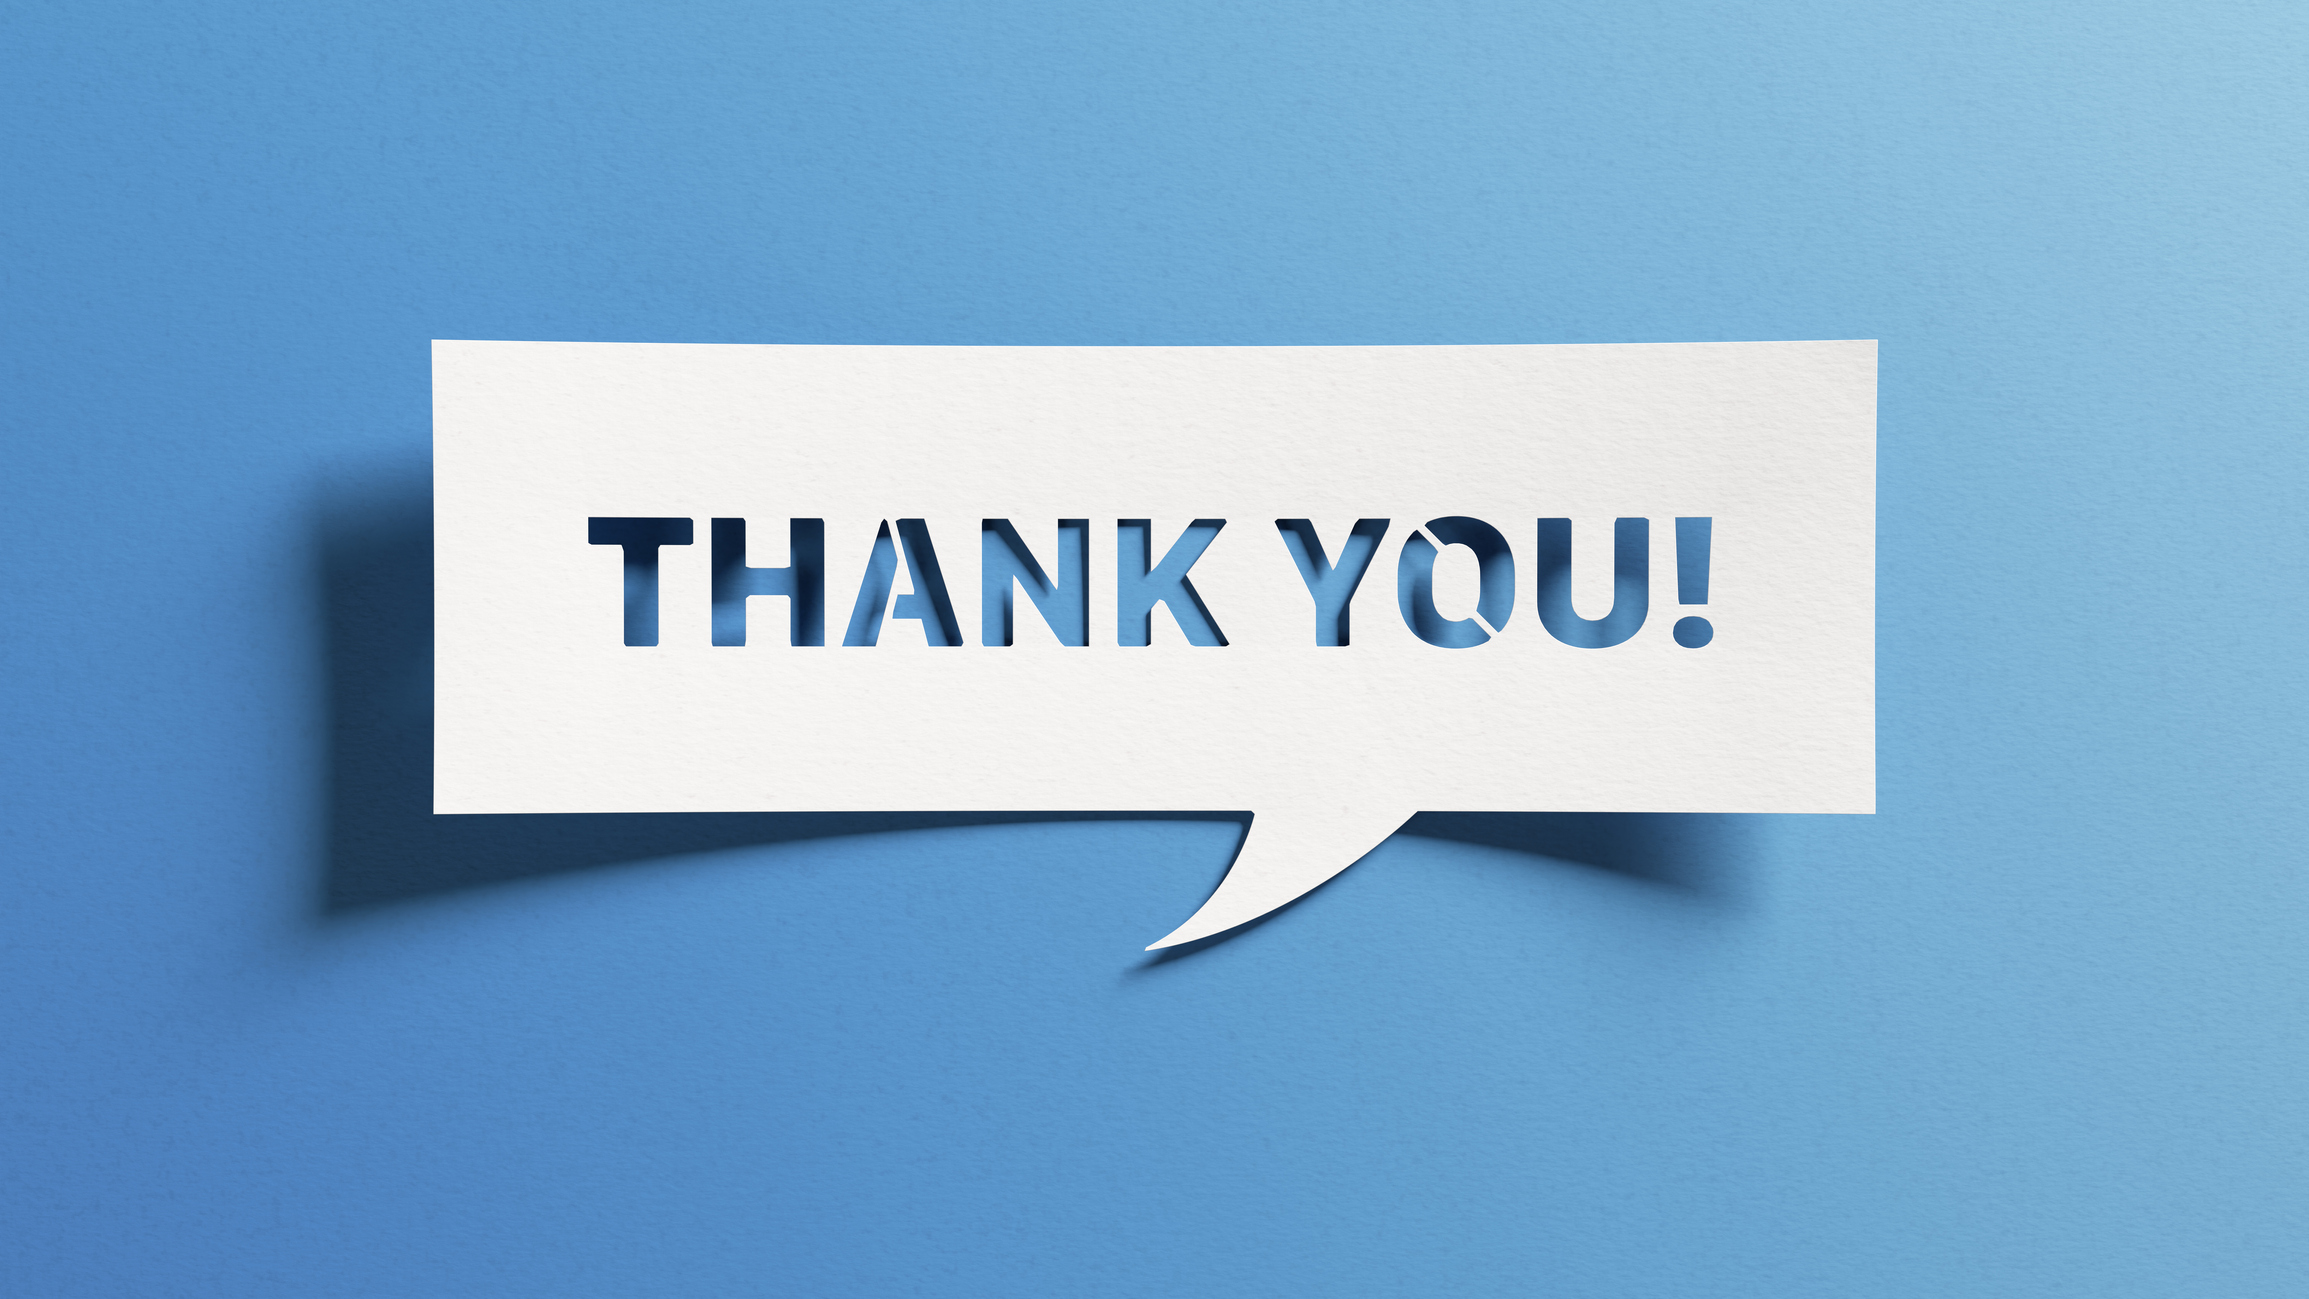 Thank you message on blue background